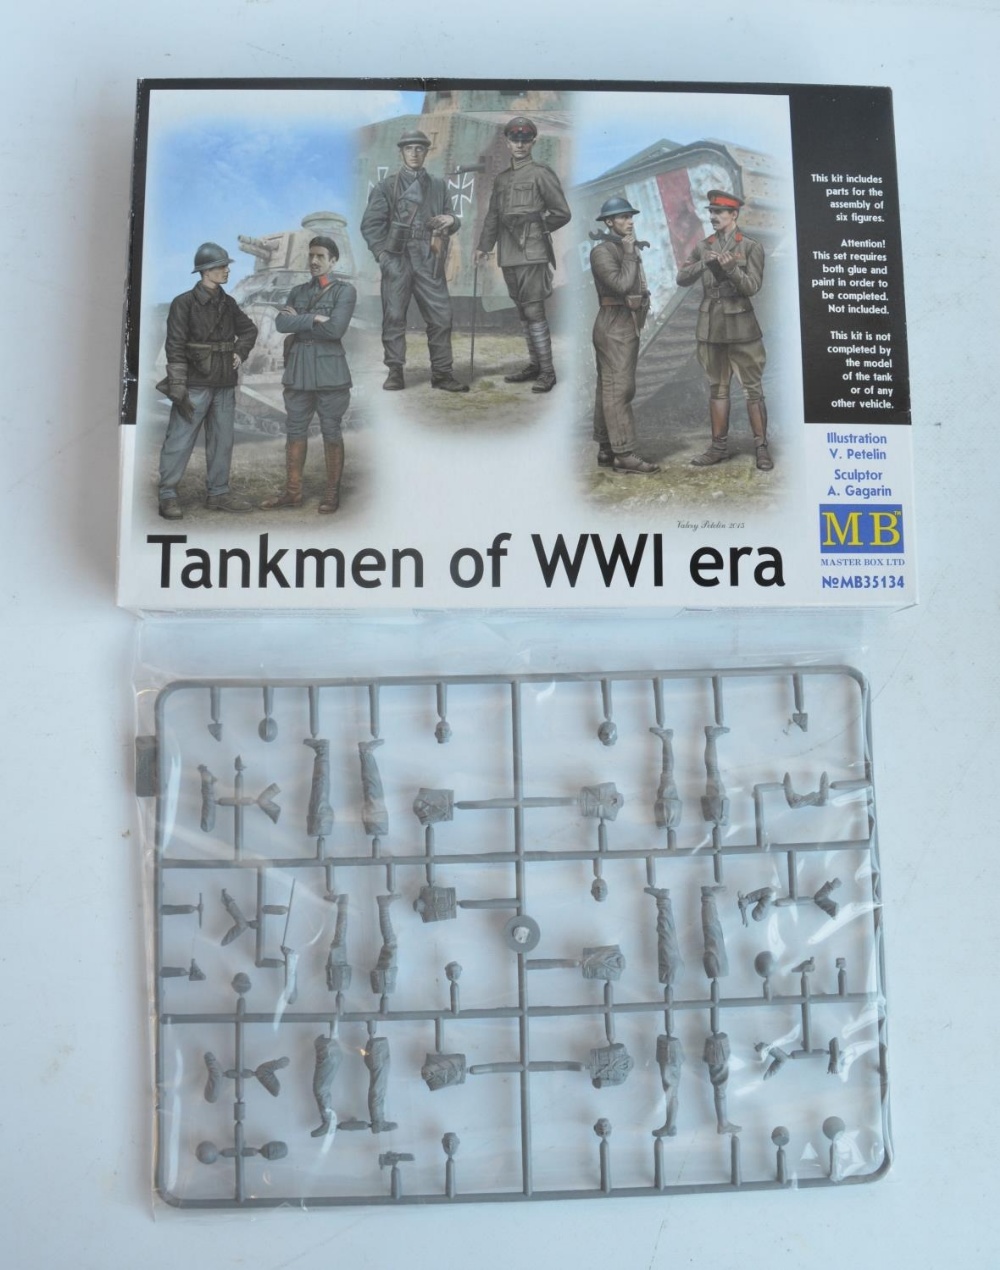 Four unbuilt 1/35 scale WW1 British tank plastic model kits from Emhar, 3 still factory sealed to - Image 3 of 3